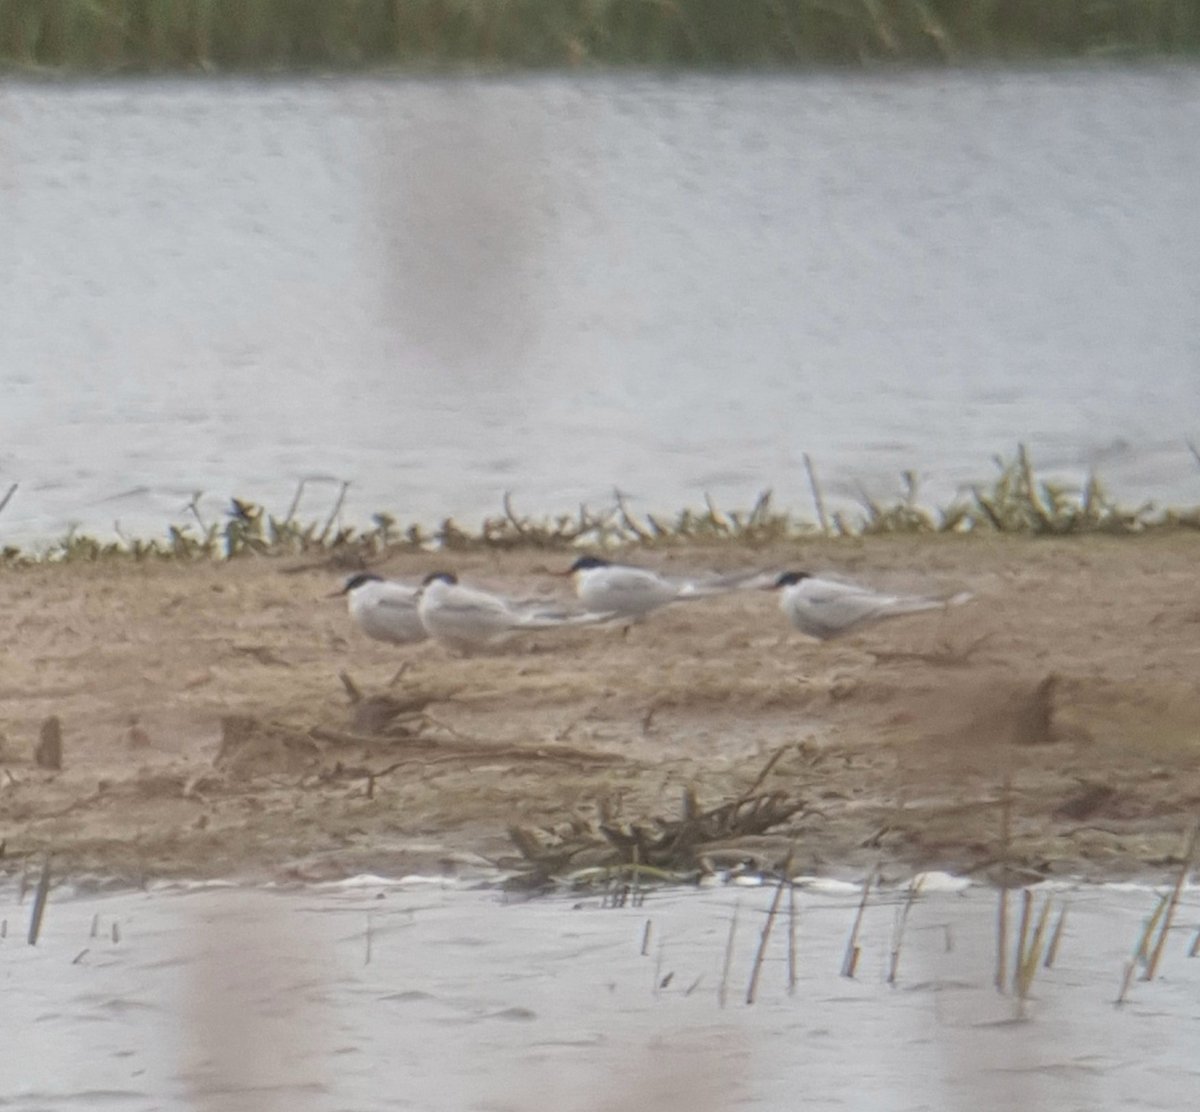 #Northantsbirds Fab day for Terns in the county, though a shame the early wader promise fizzled out. 2 visits to Summerleys with Little, 2 Black and 12+ Arctic Tern, with a visit to ILM for 2 more Little Tern (on the 'same' pit I found my first county Little in the mid-80's!)